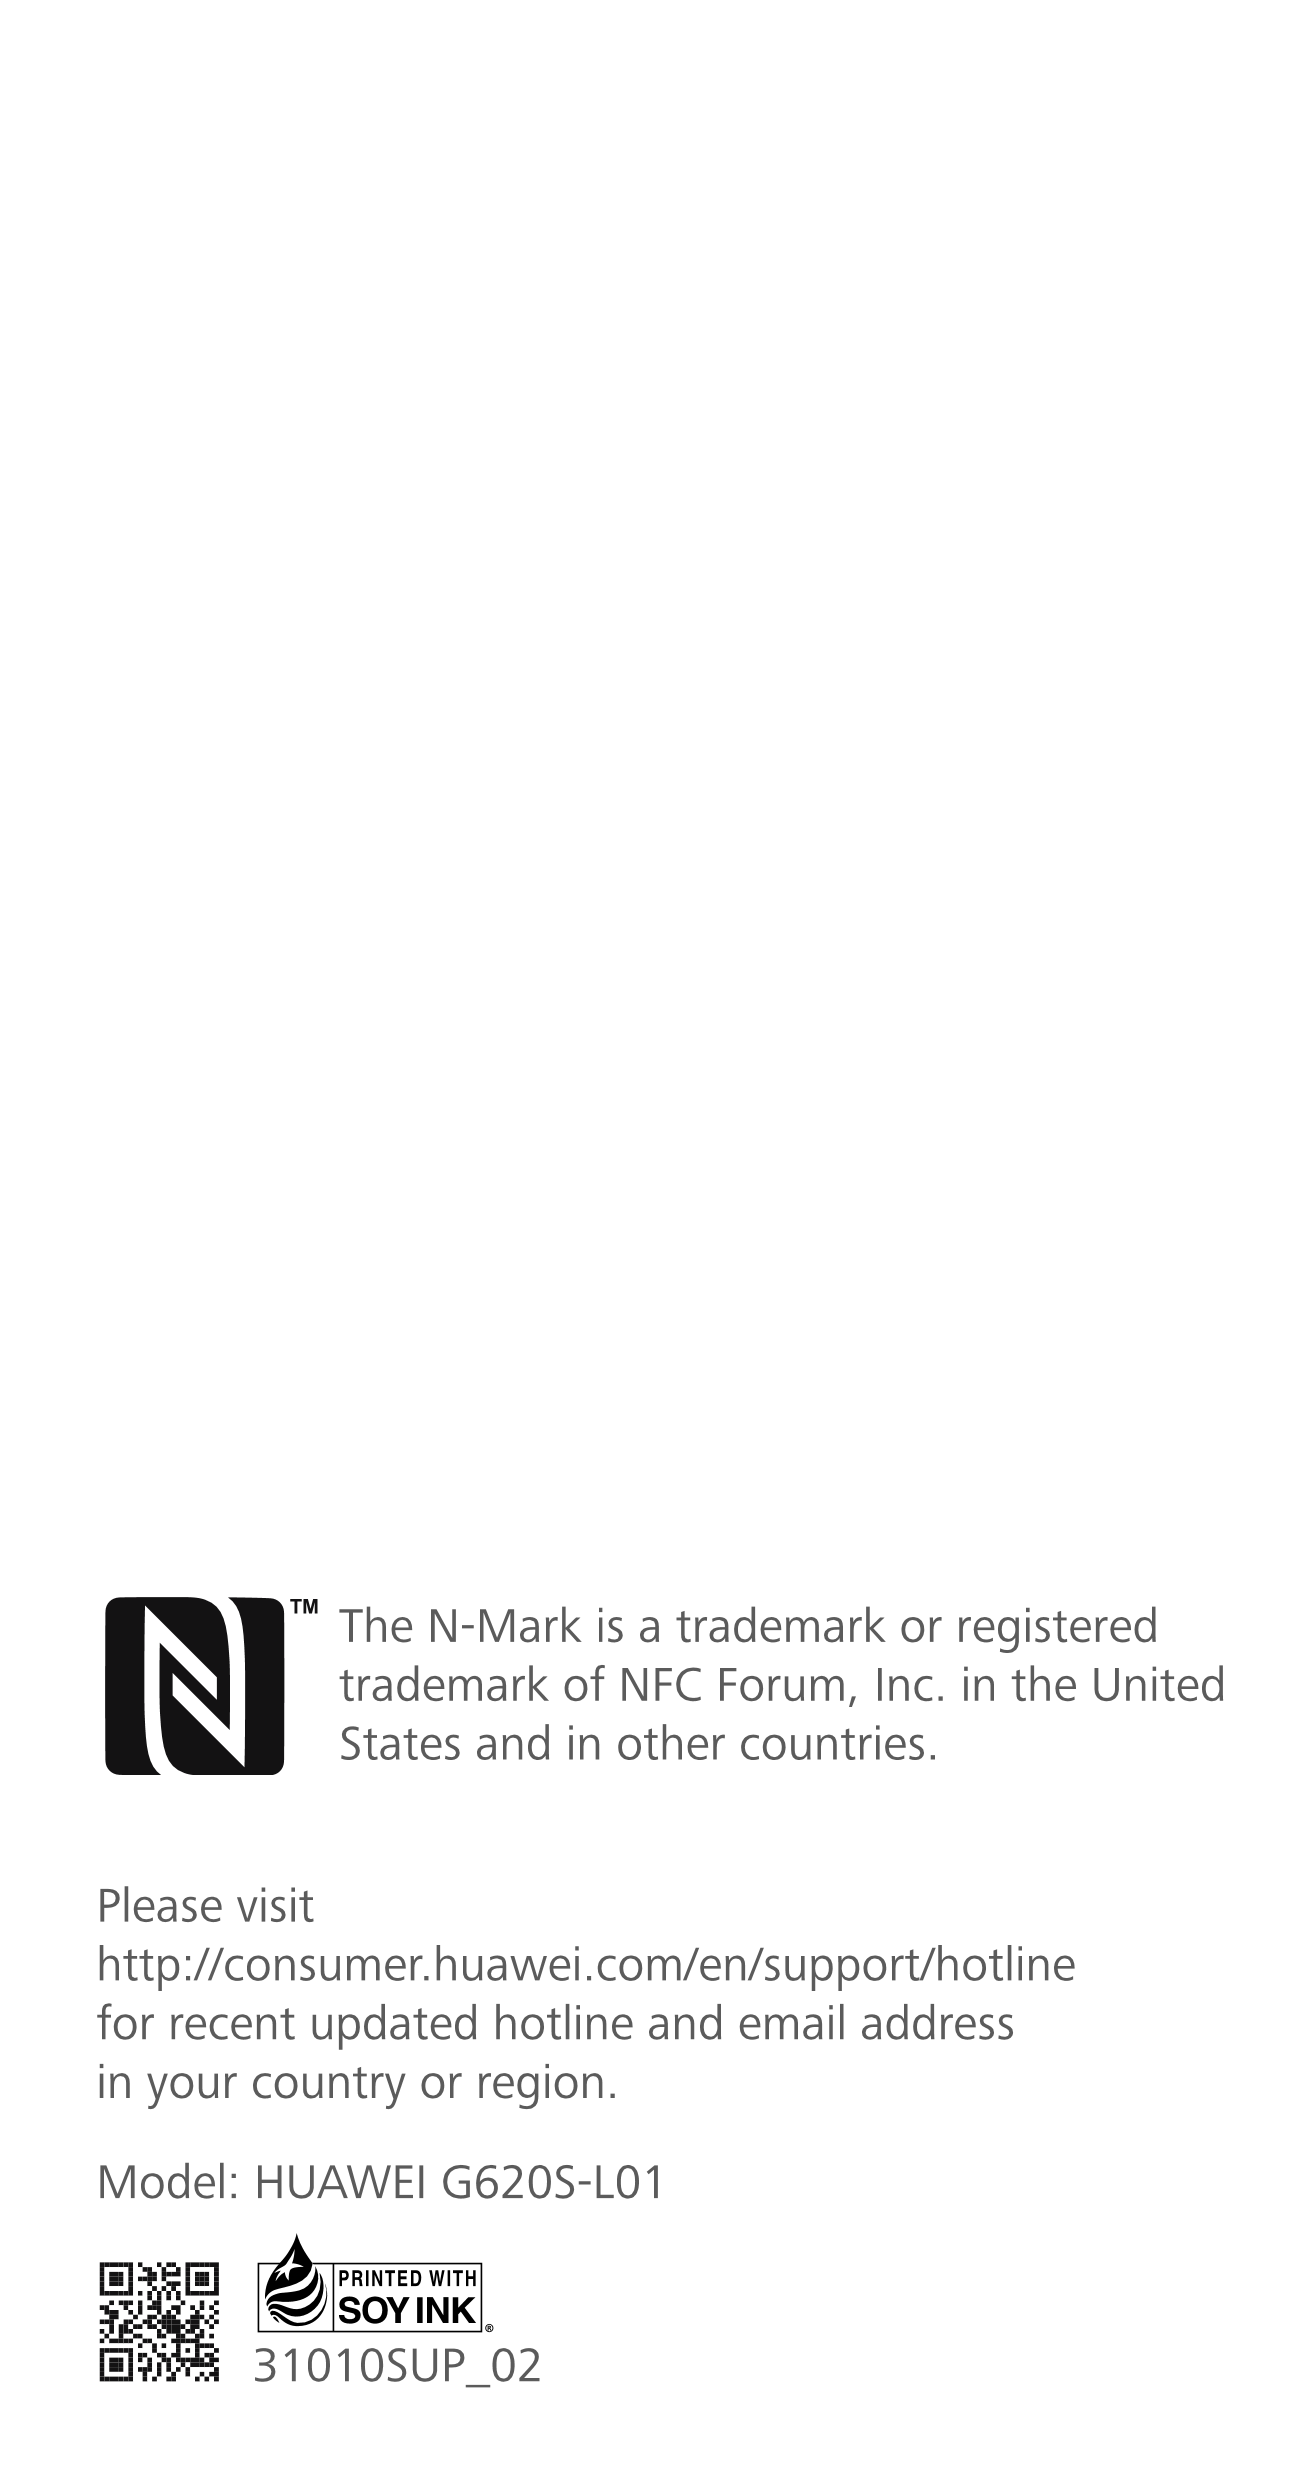 ए৖פ҆11mm
The N-Mark is a trademark or registered 
trademark of NFC Forum, Inc. in the United 
States and in other countries.
Ple